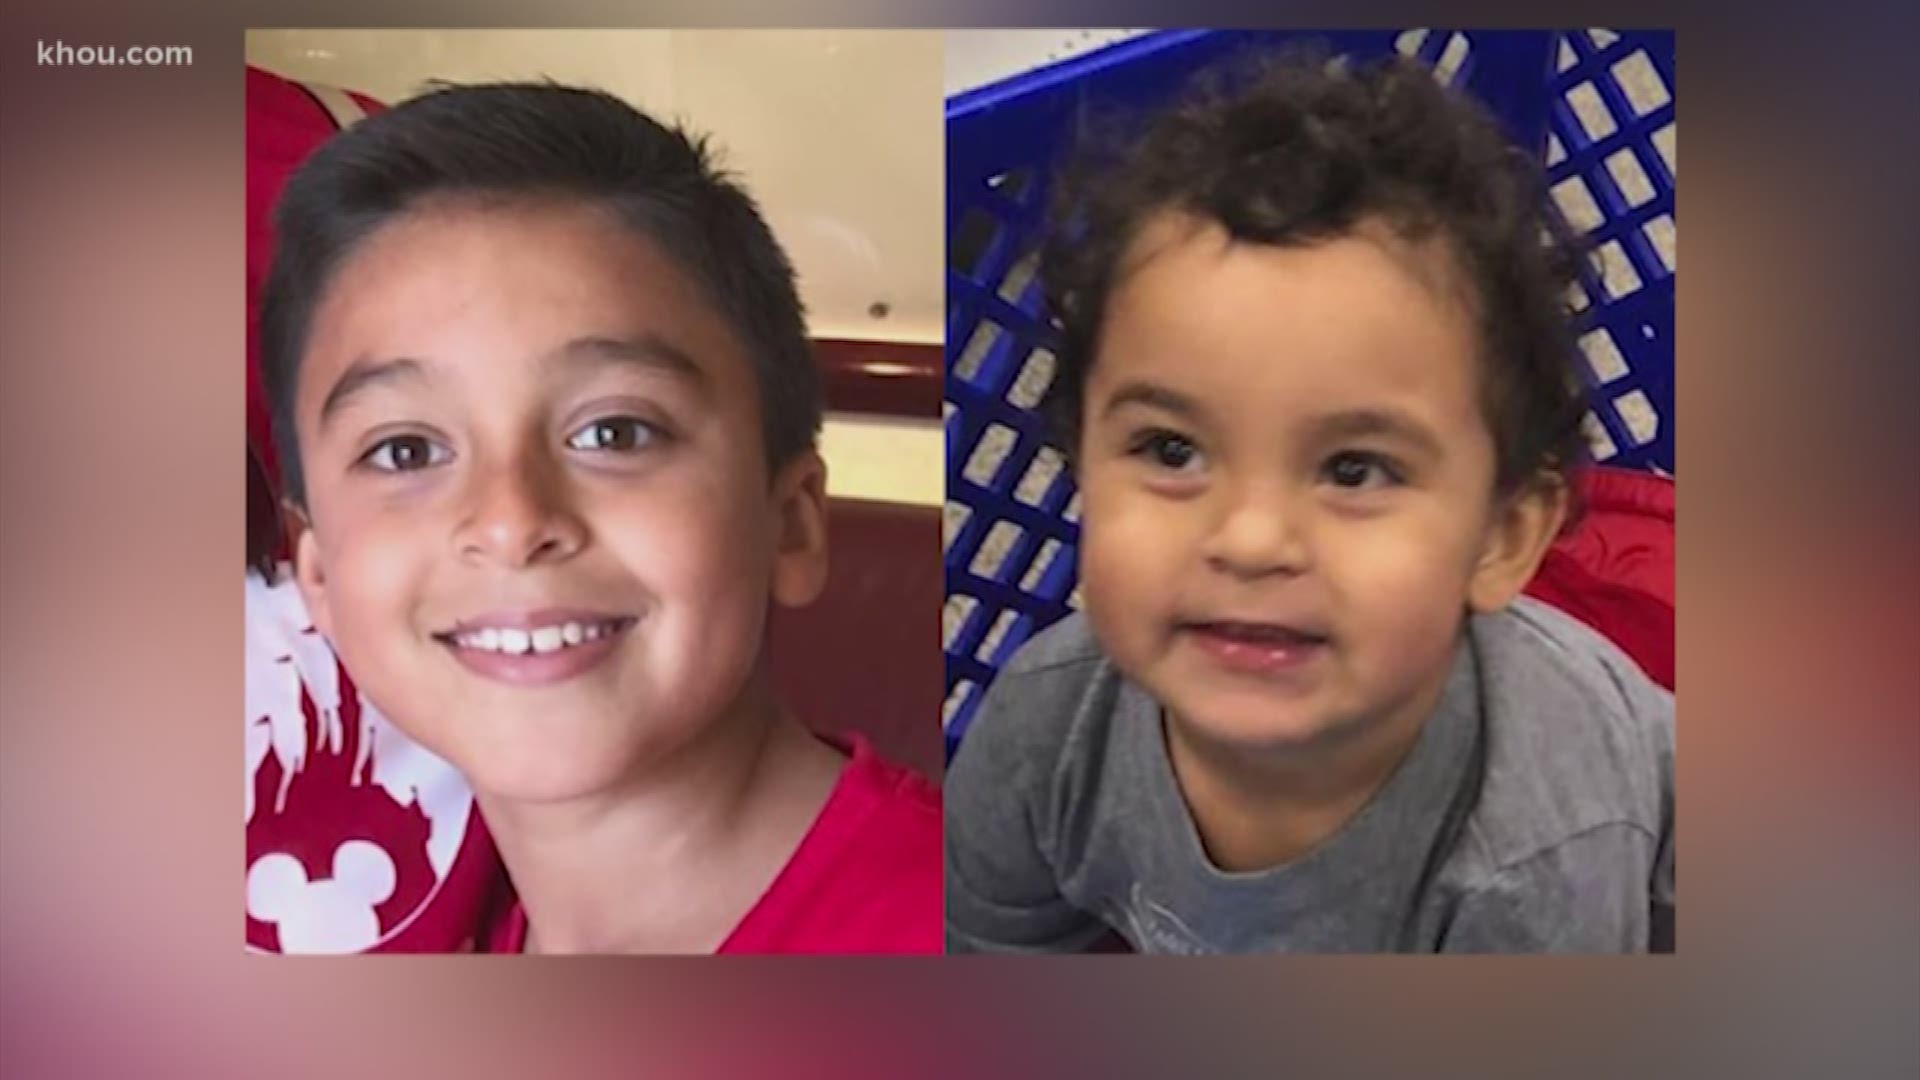 An AMBER Alert has been issued for two children who are believed to be in grave danger, according to the El Paso Police Department. Leonardo Ortega, 8, and Matias Carrillo, 2, were last seen in El Paso. An AMBER Alert was issued for the boys on Saturday. Police are also looking for Justin Carrillo, 26, in connection with the boys' abduction.